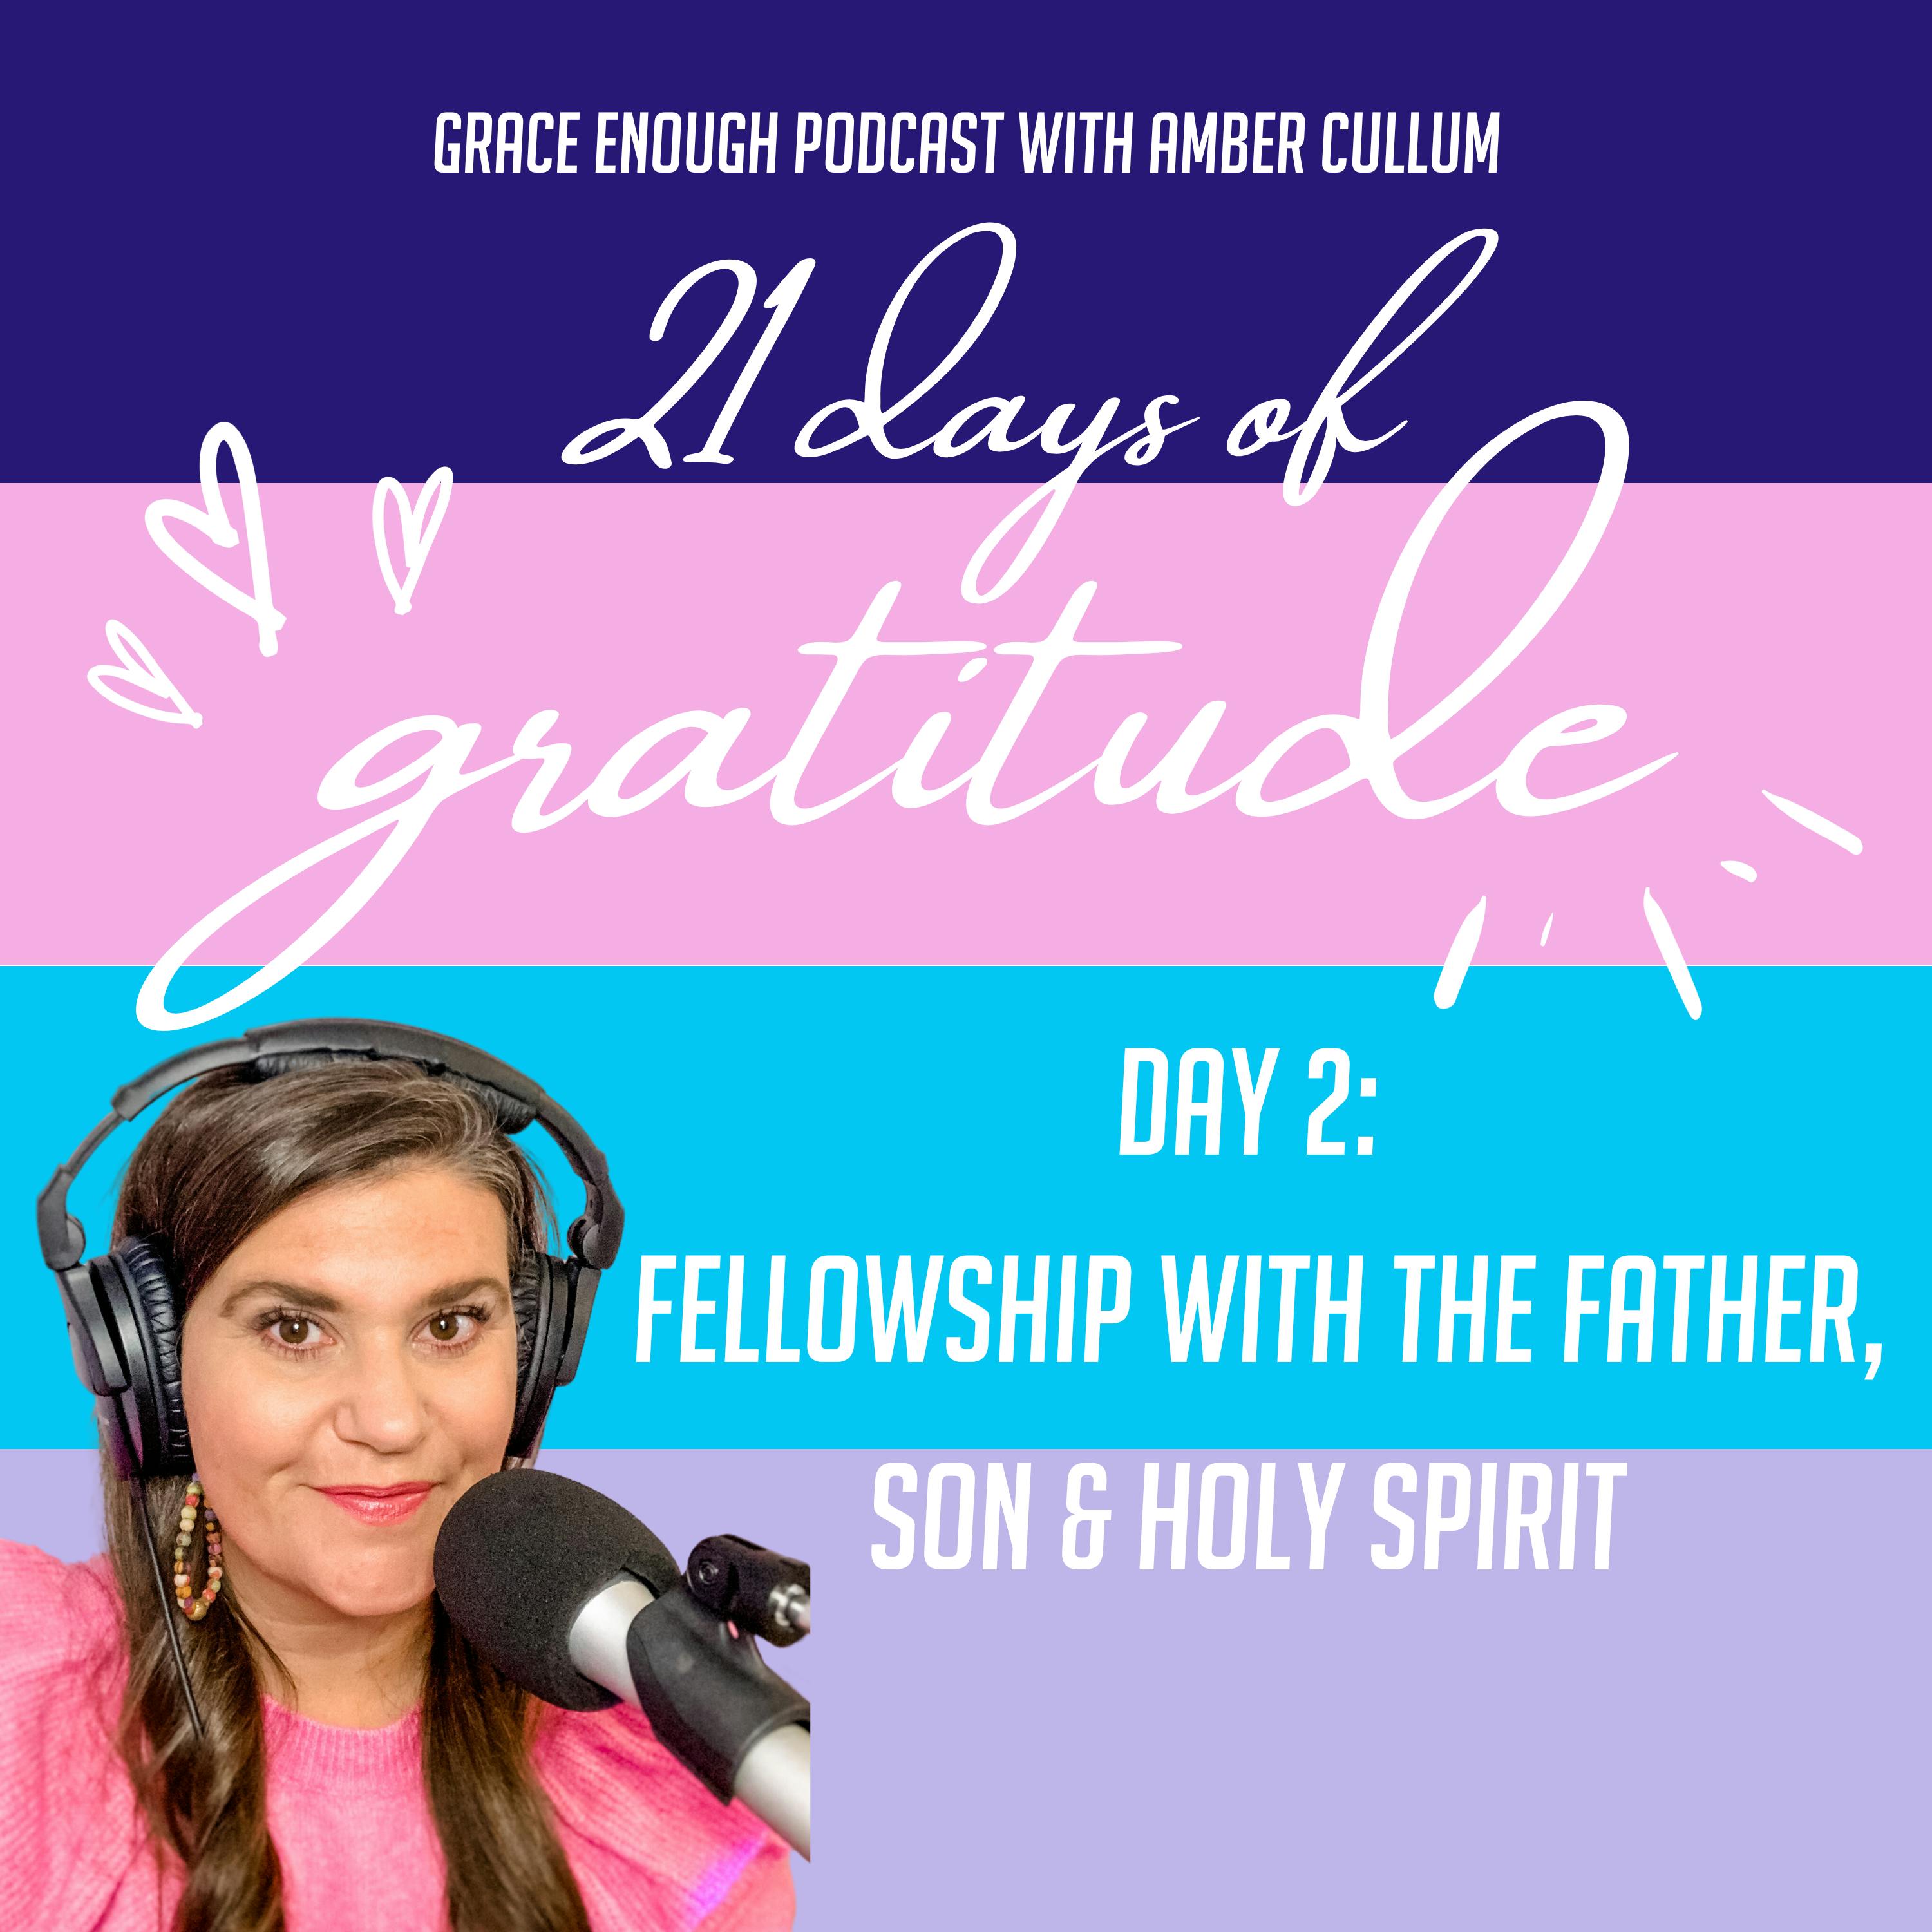 2/21 Days of Gratitude: Fellowship with the Father, Son & Holy Spirit